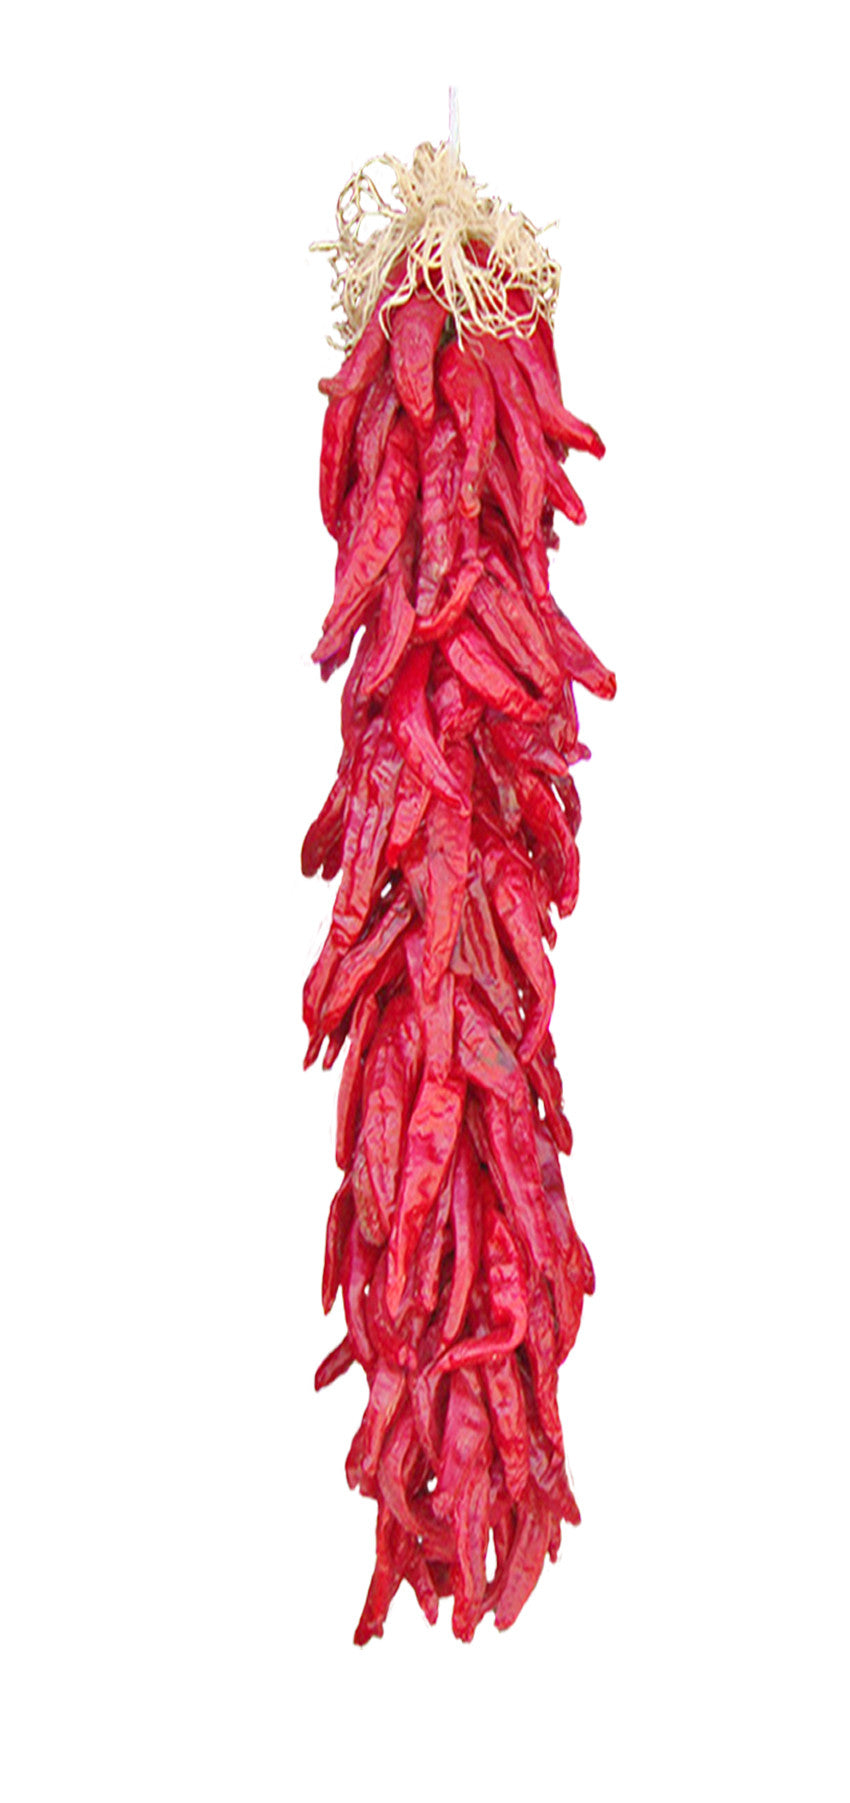 Hatch Red Hot - Sandia Hot Chile Seeds - Sandia Seed Company